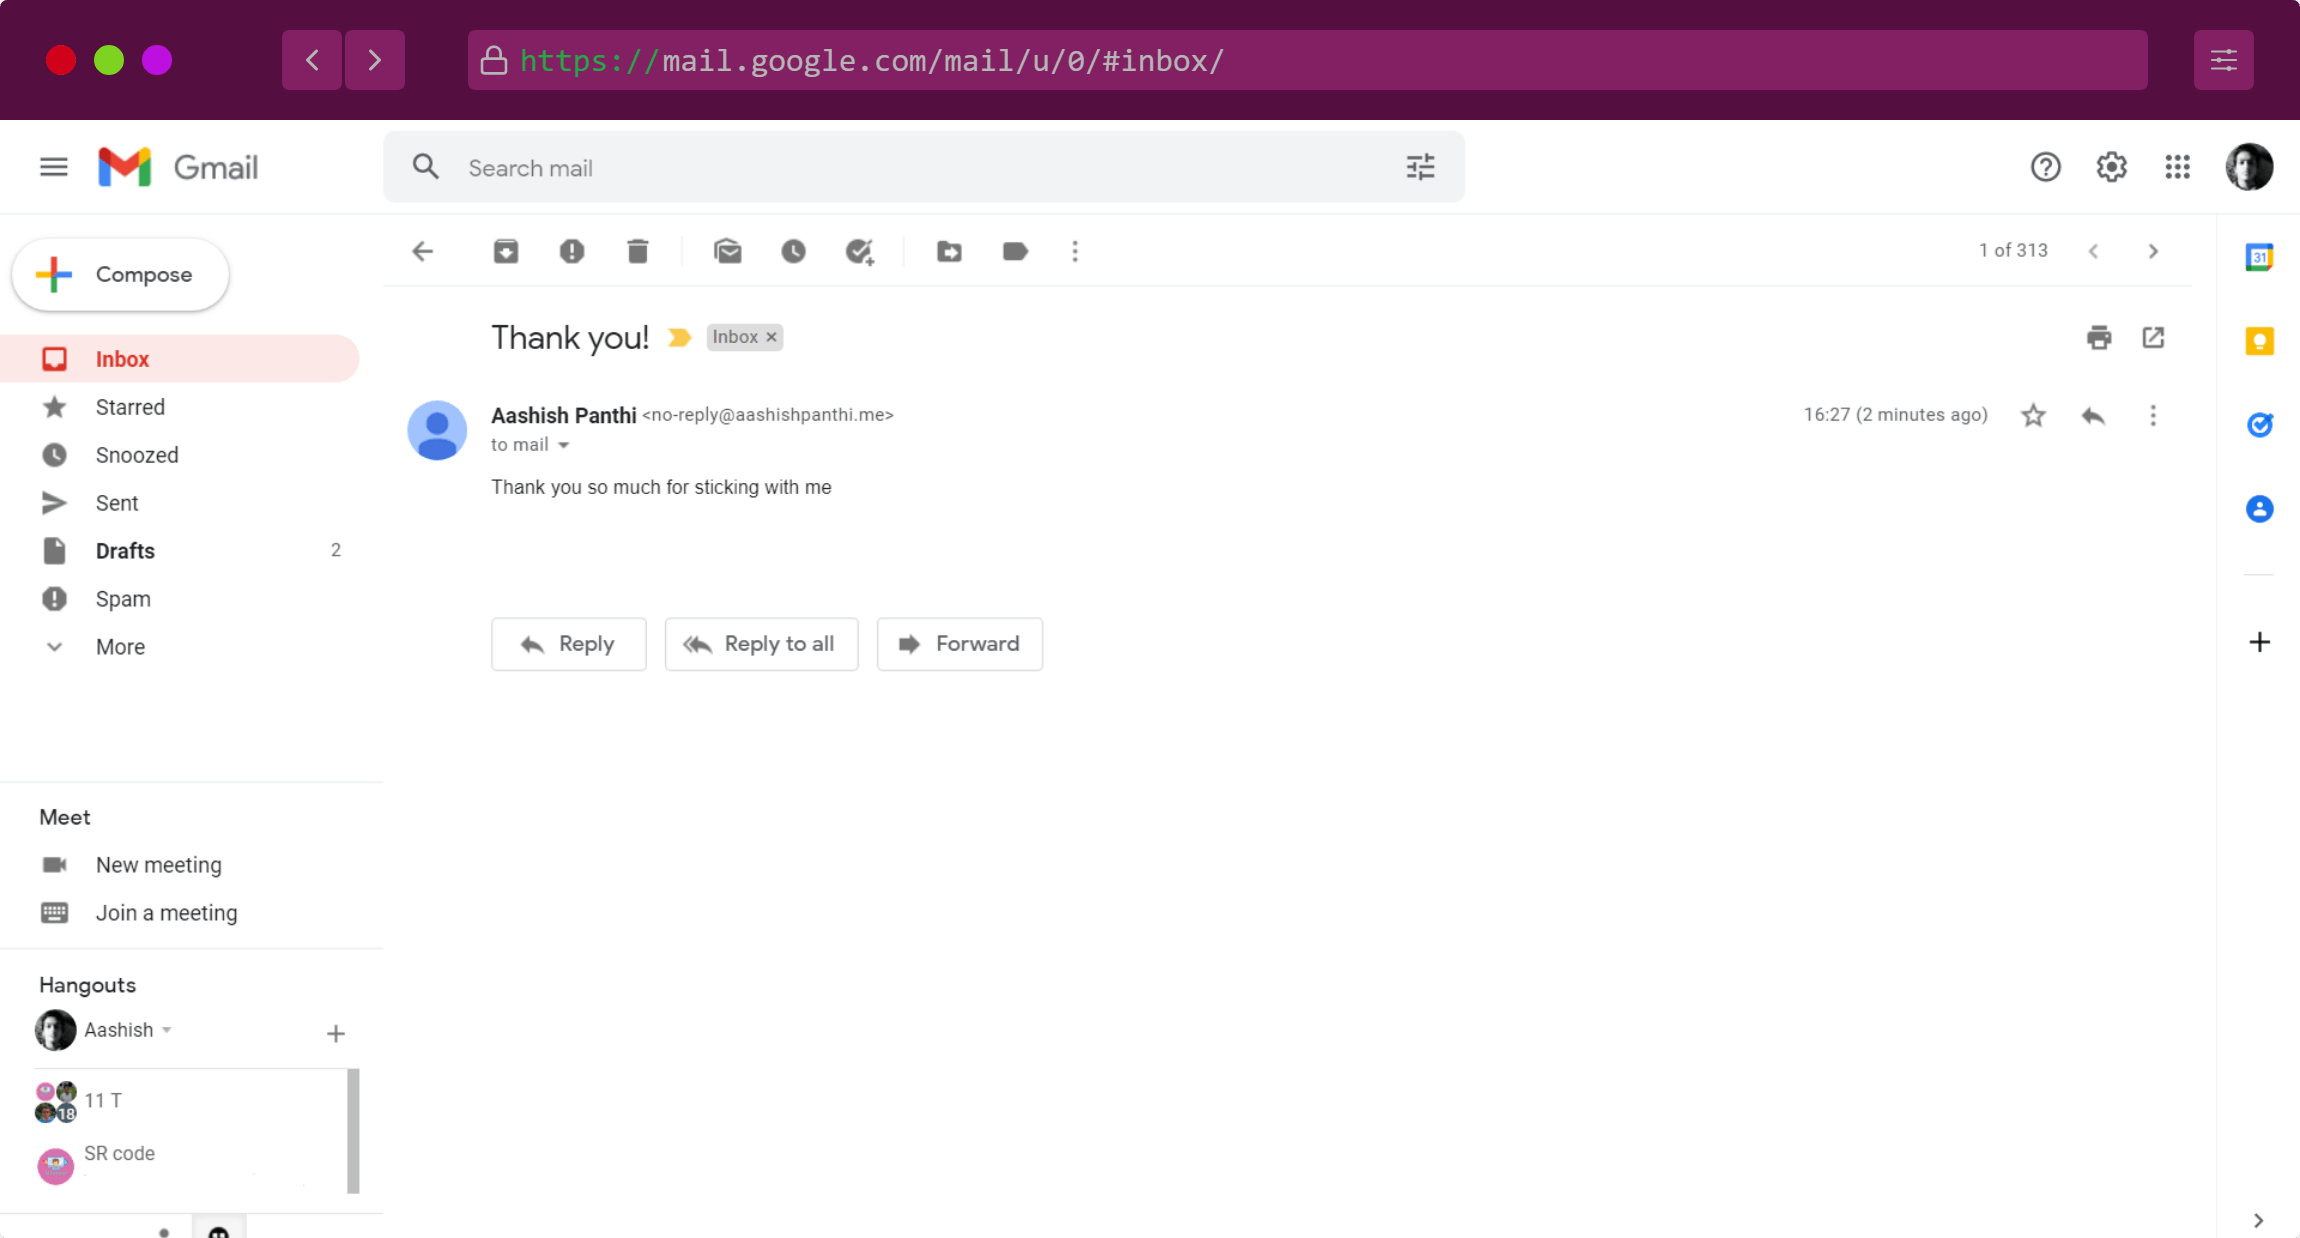 email received from nodemailer